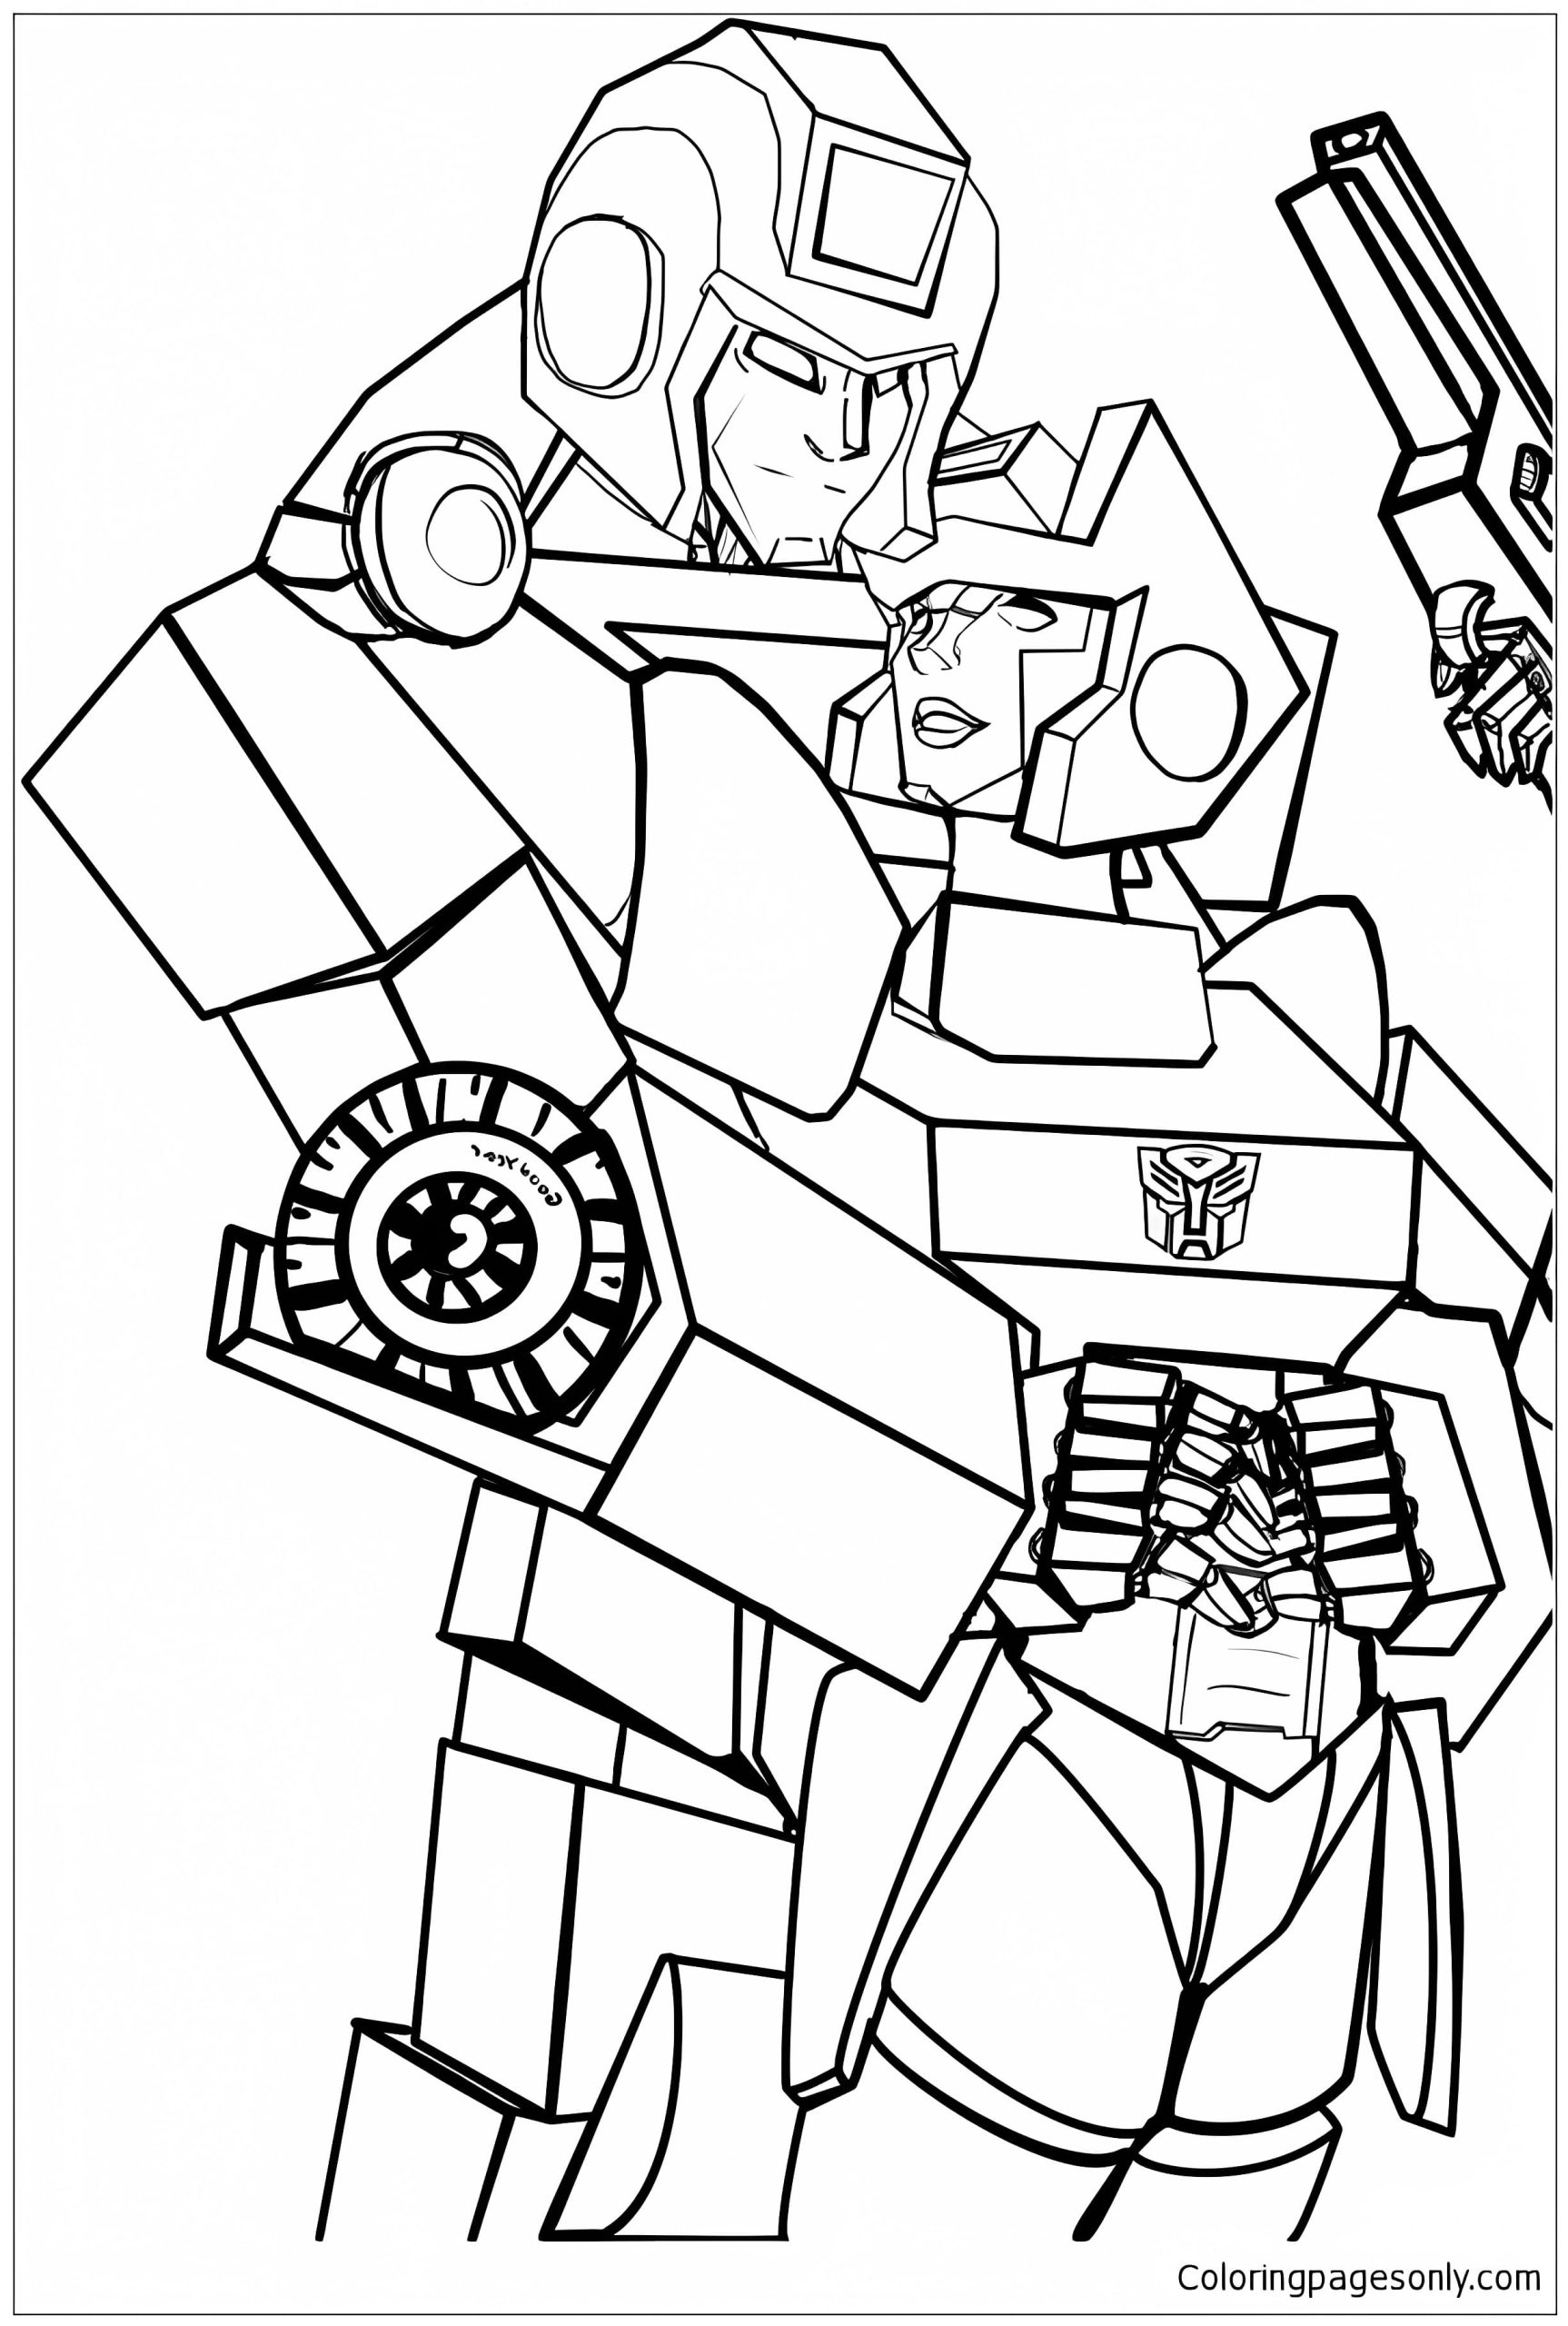 Awesome Ironhide Of Transformers Coloring Pages